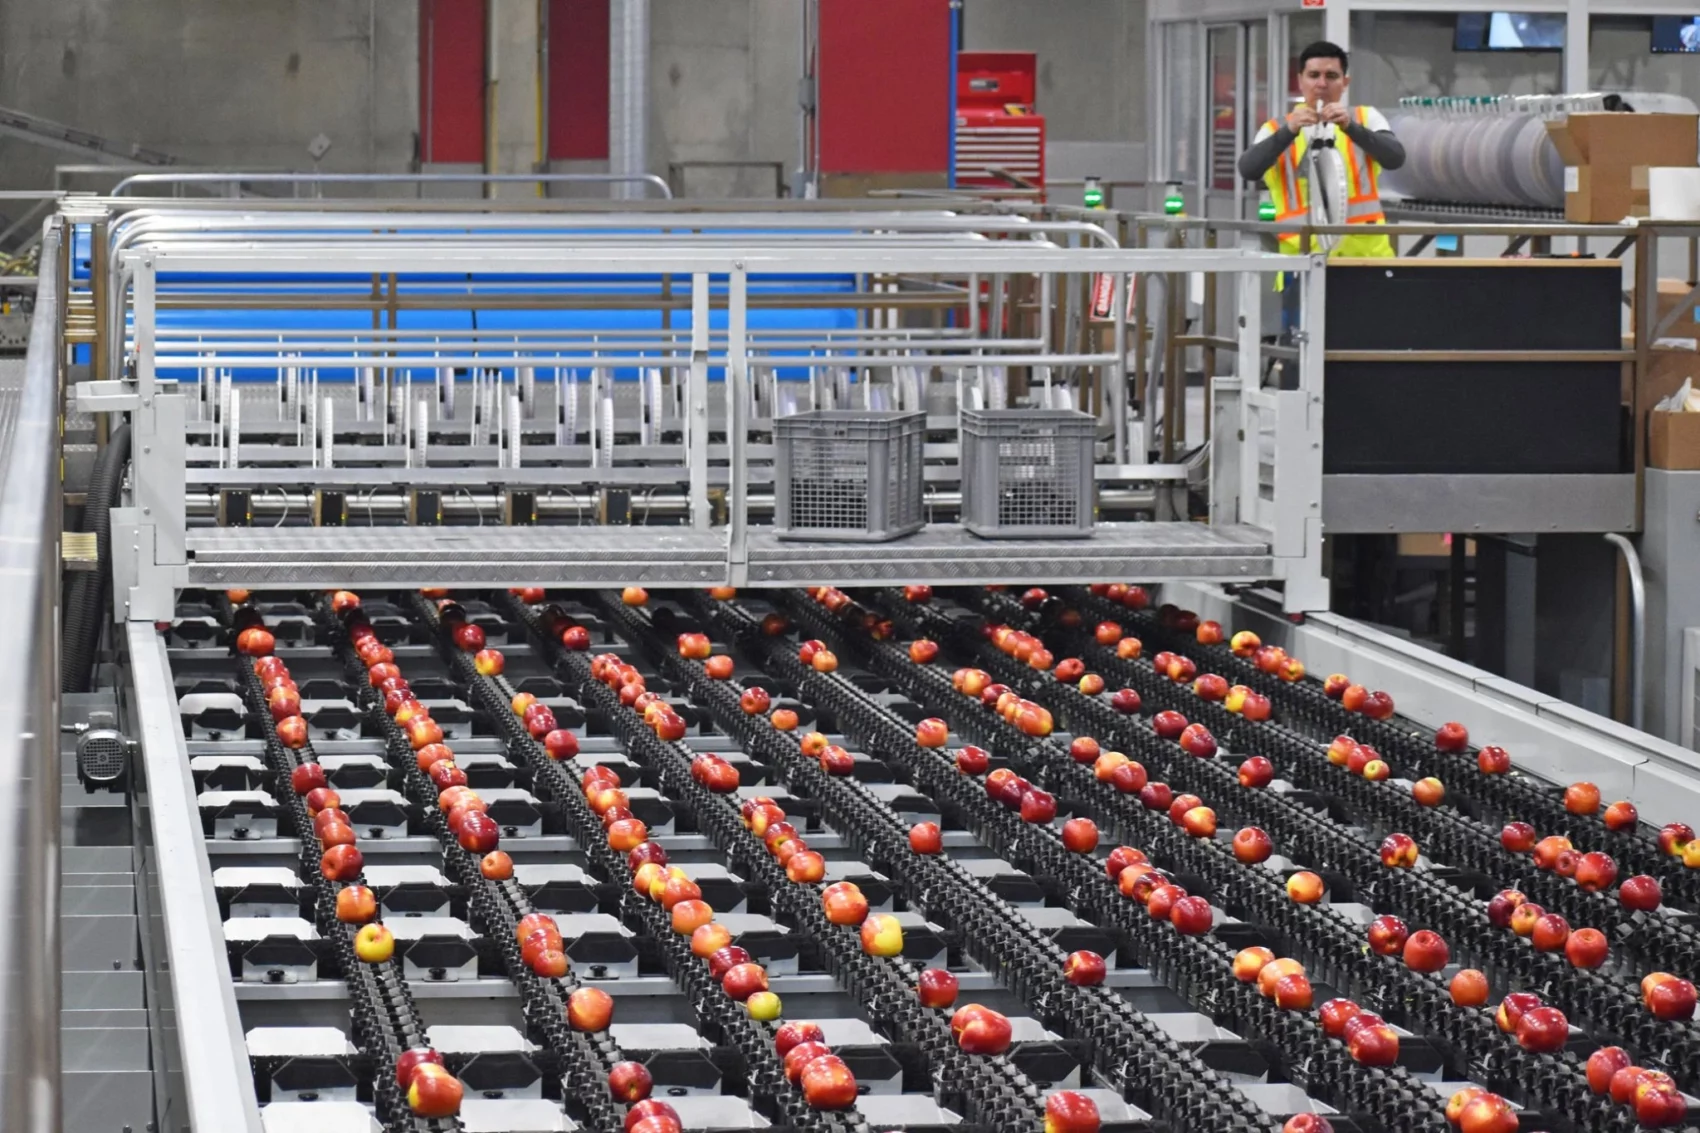 Apples on a packing line.